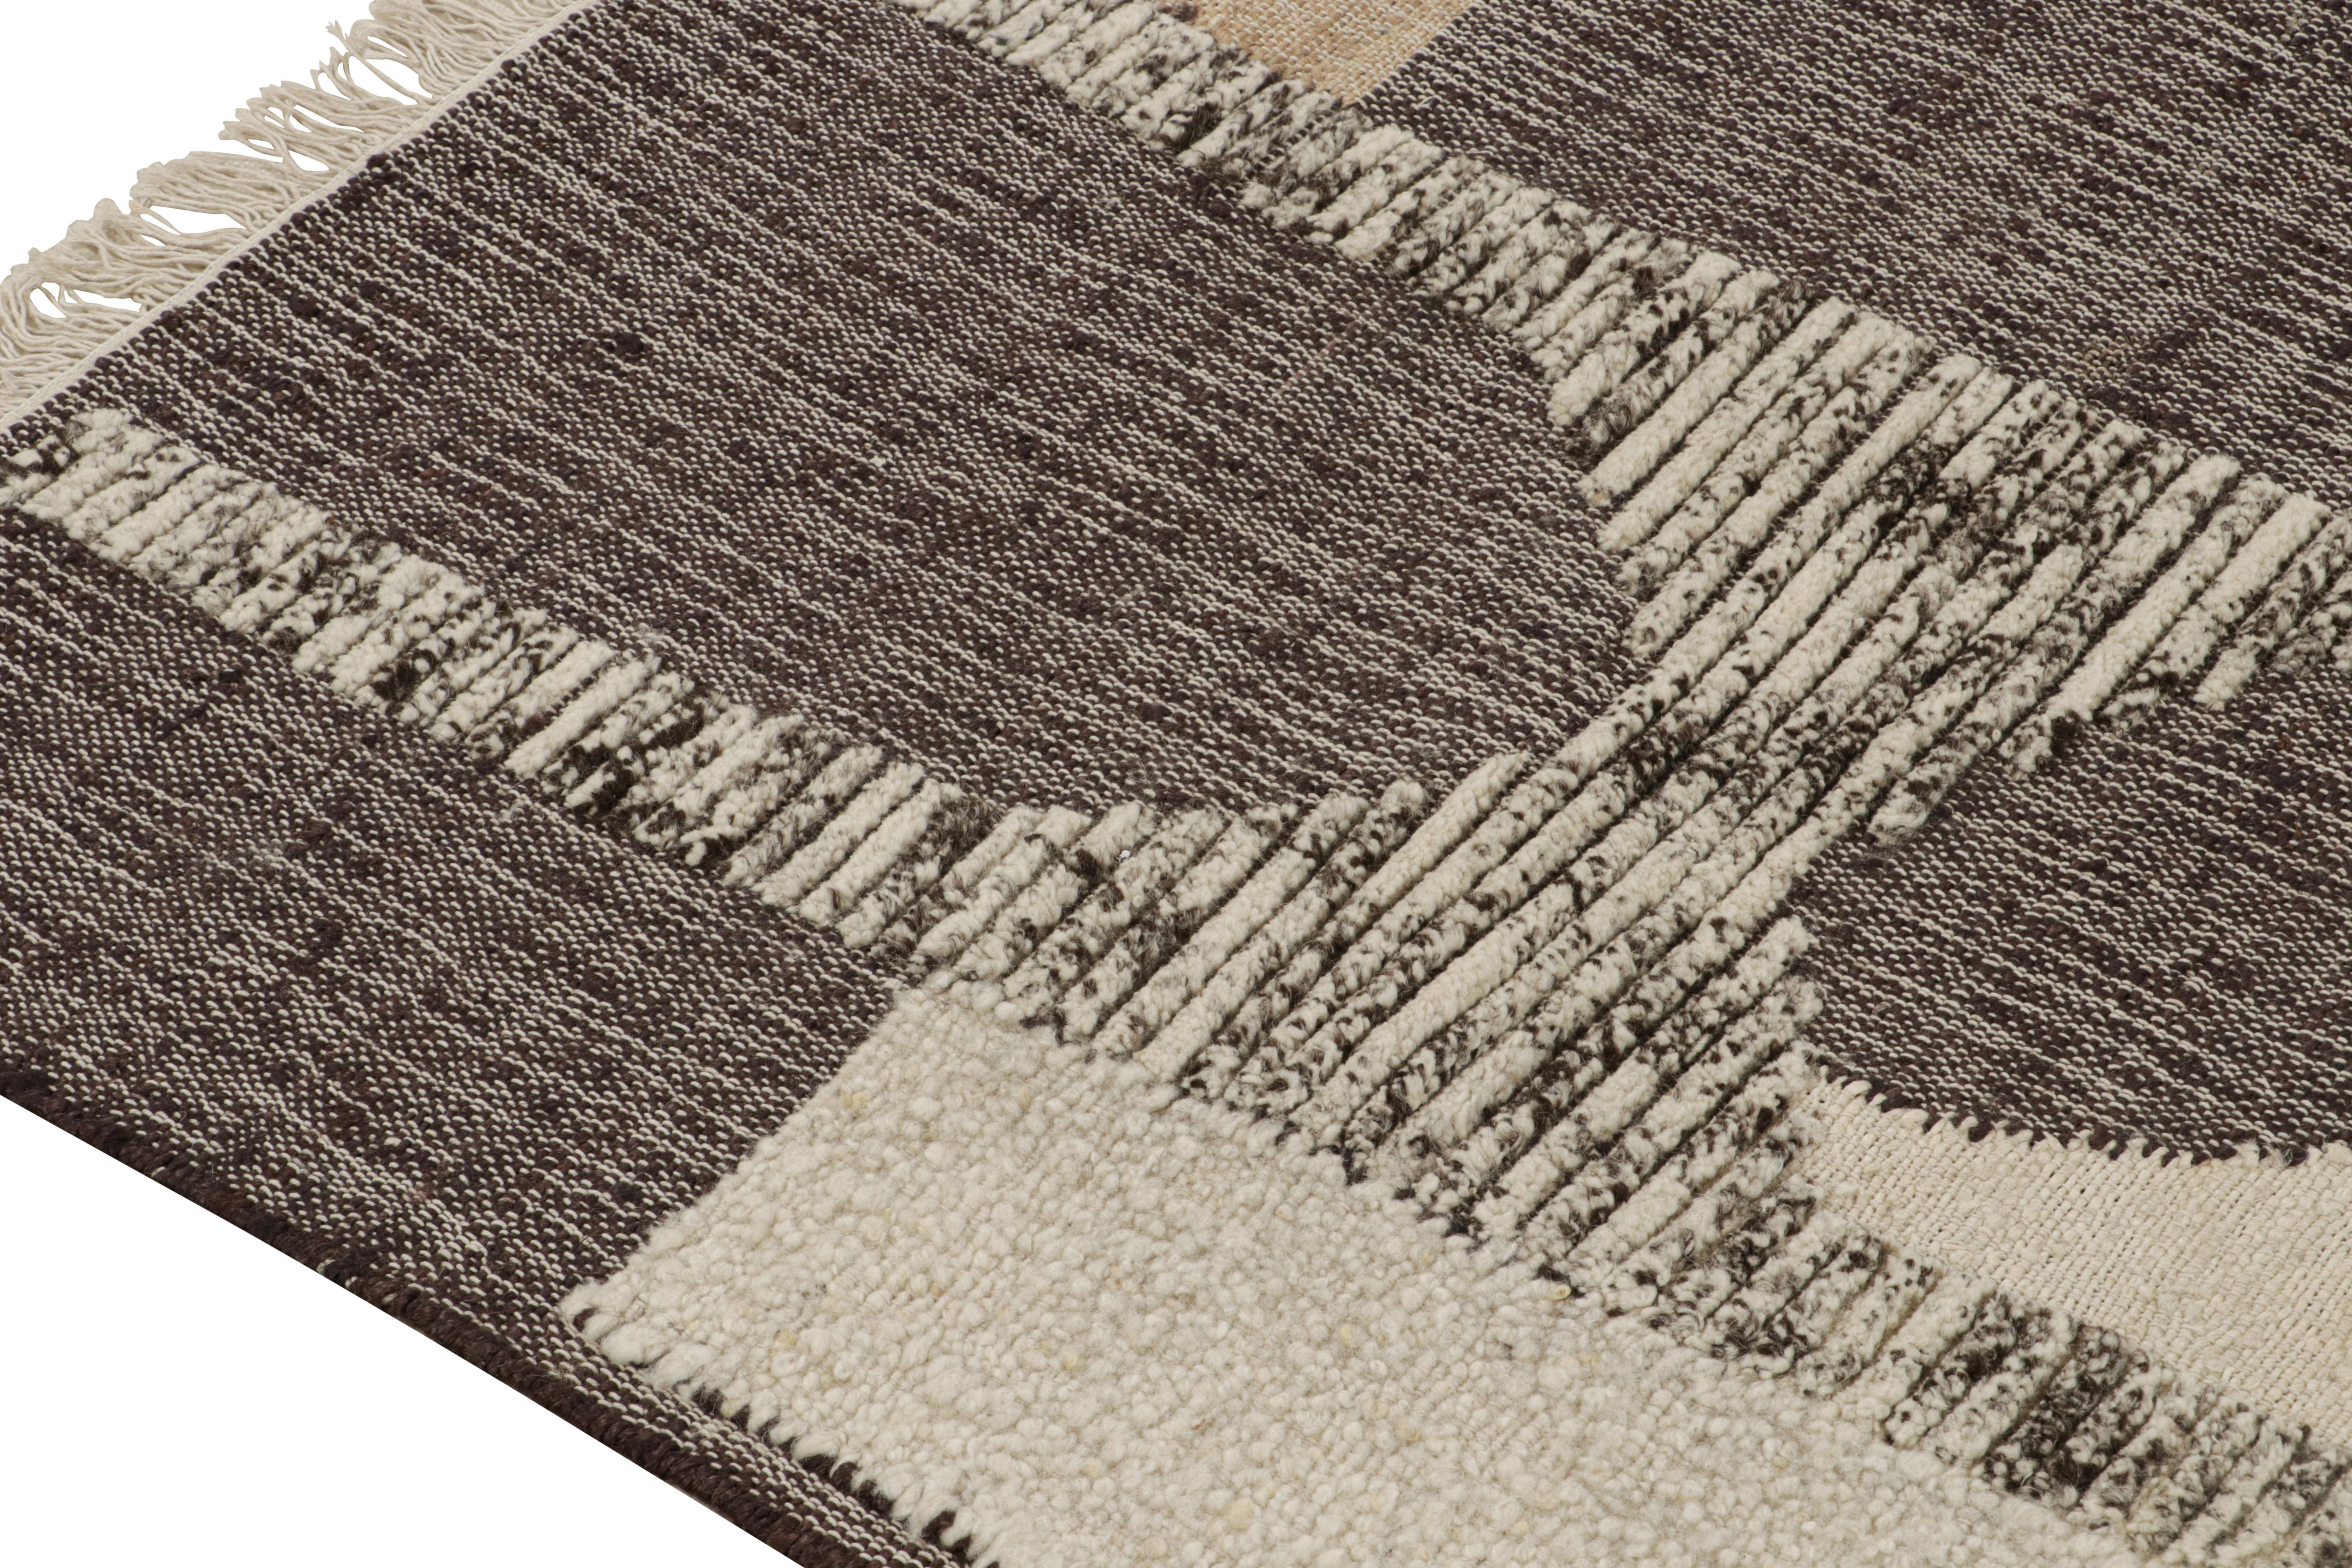 Hand-Woven Rug & Kilim’s Contemporary kilim rug in Brown, White & Black Abstract Pattern For Sale